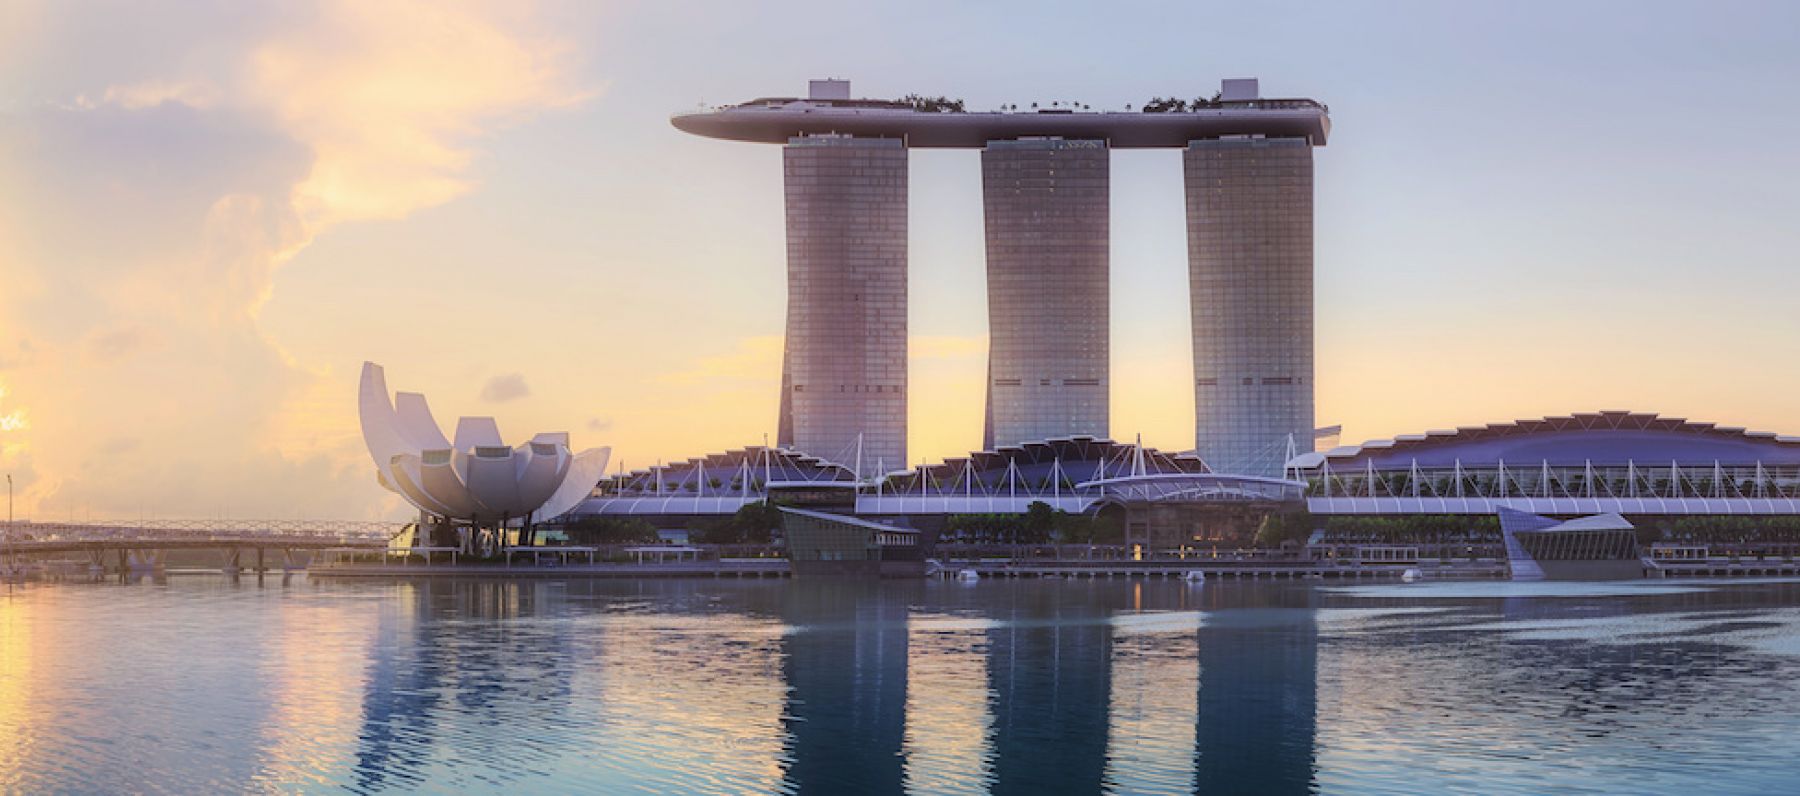 ThinkPlace has 3 big ideas for the future of Singapore